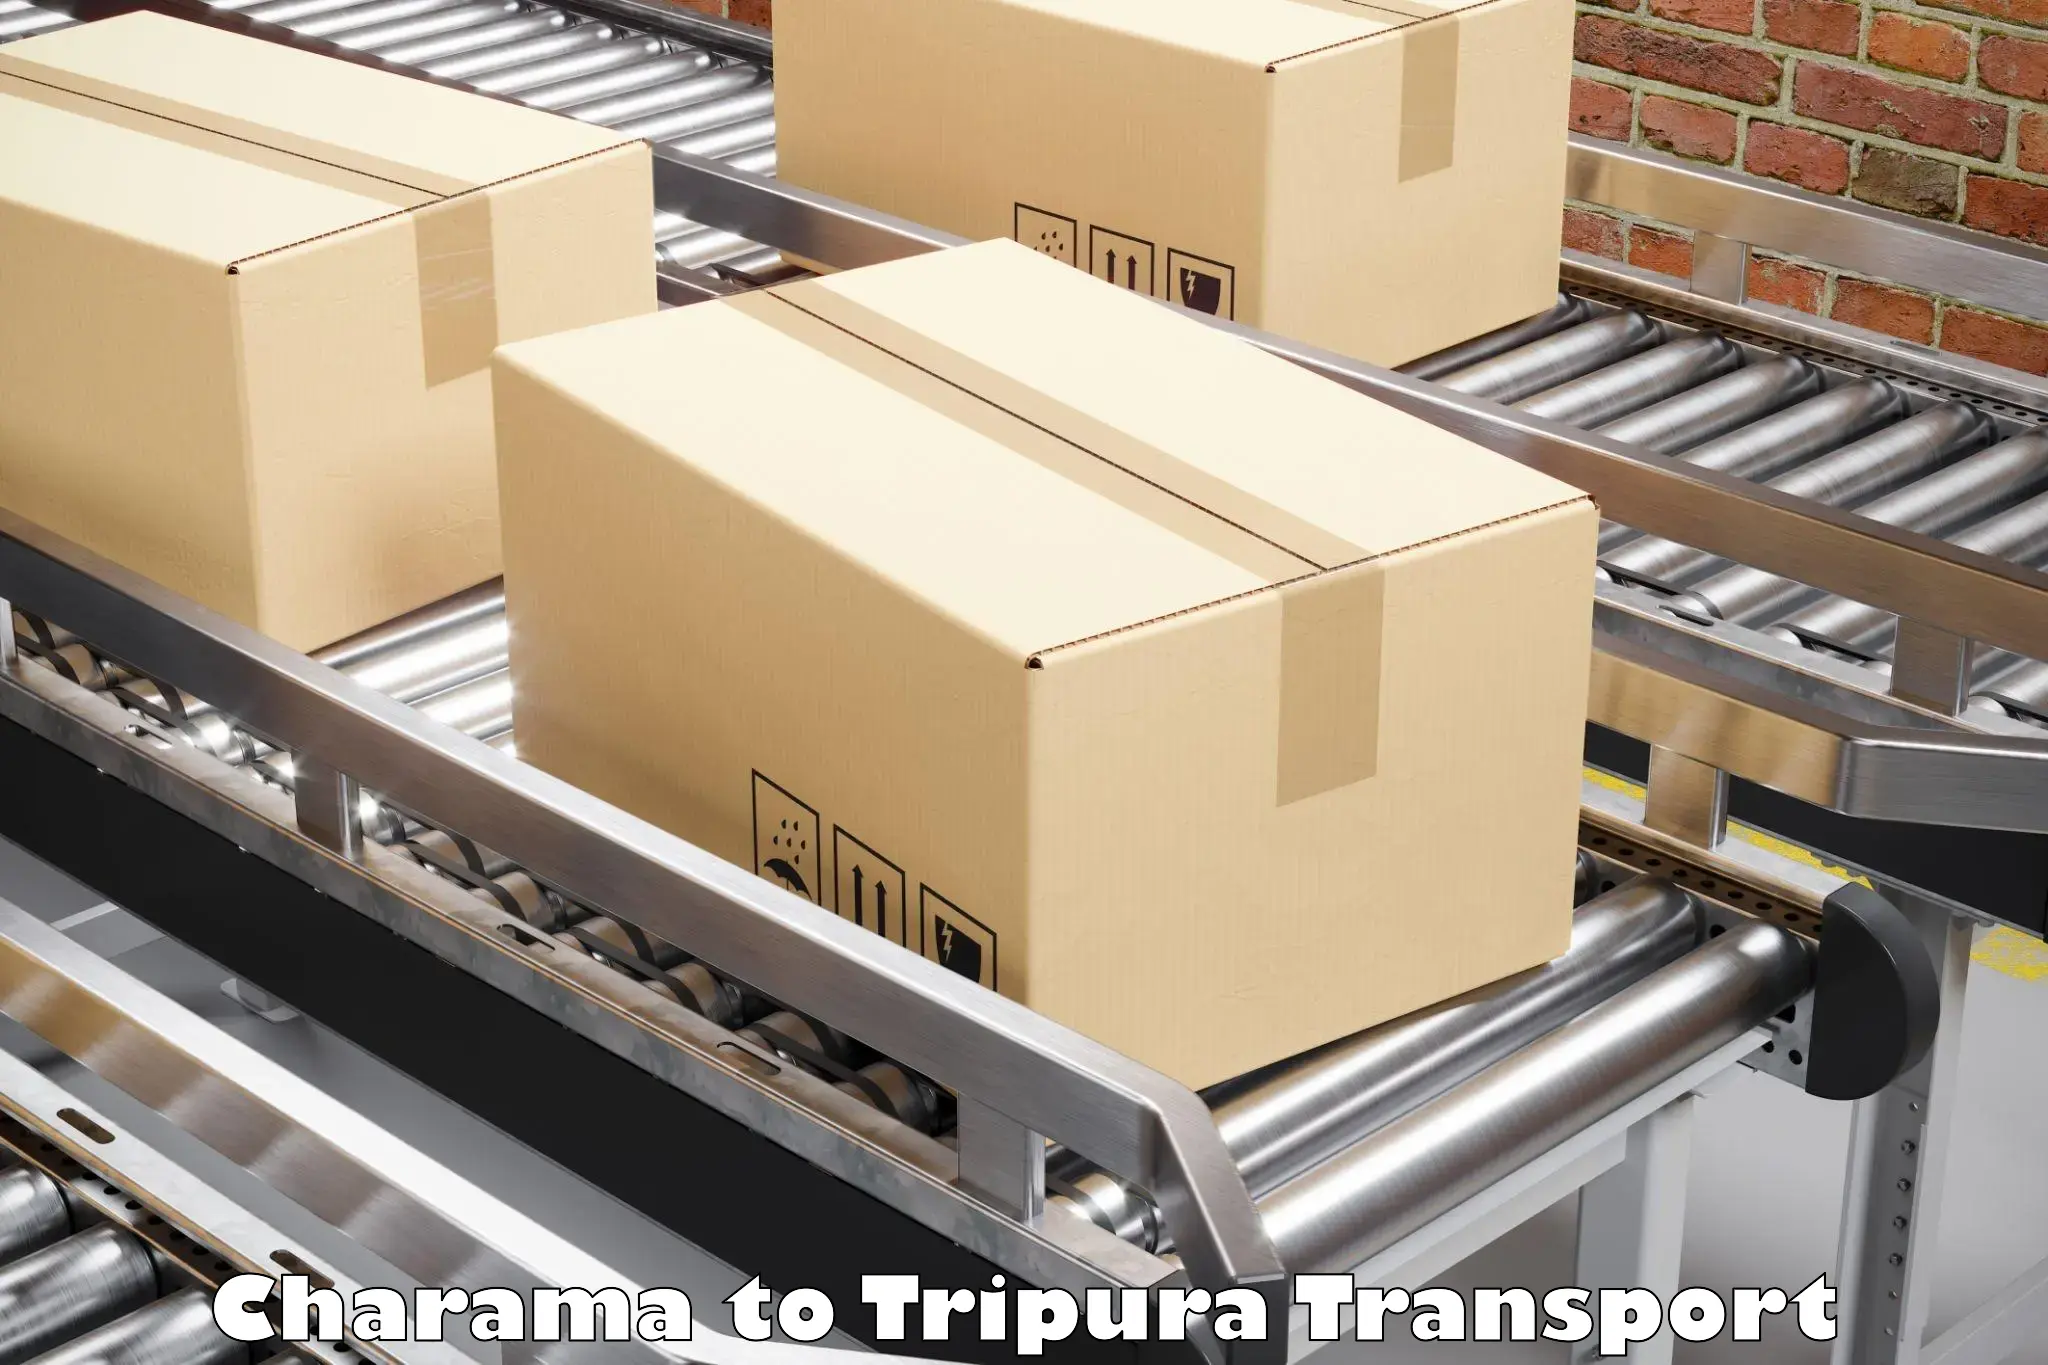 Online transport service Charama to West Tripura